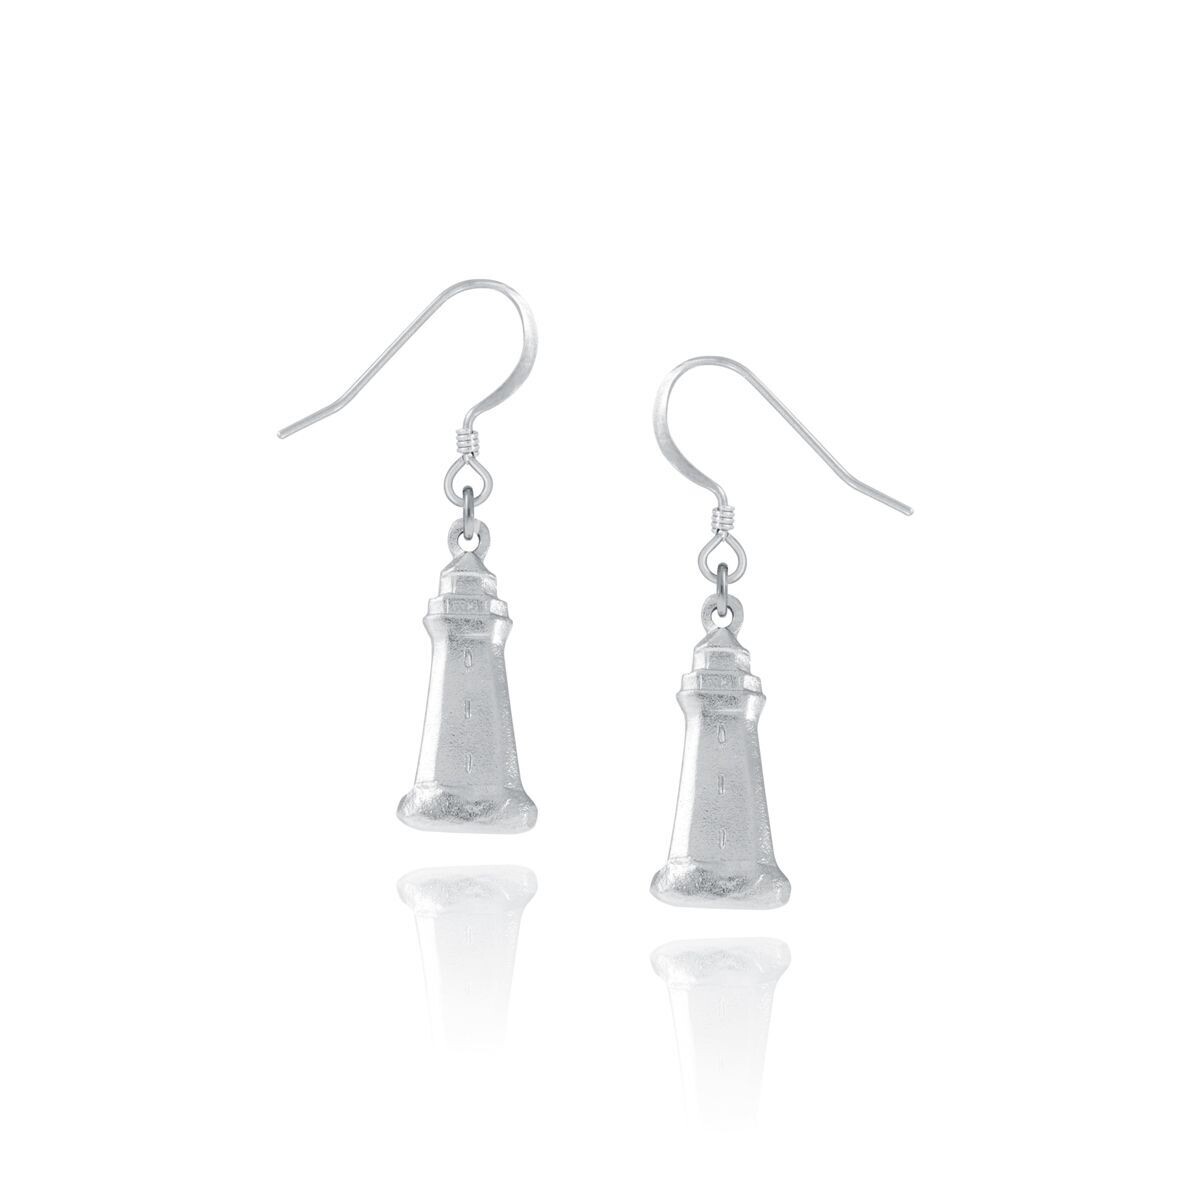 Peggy's Cove Earring - Amos